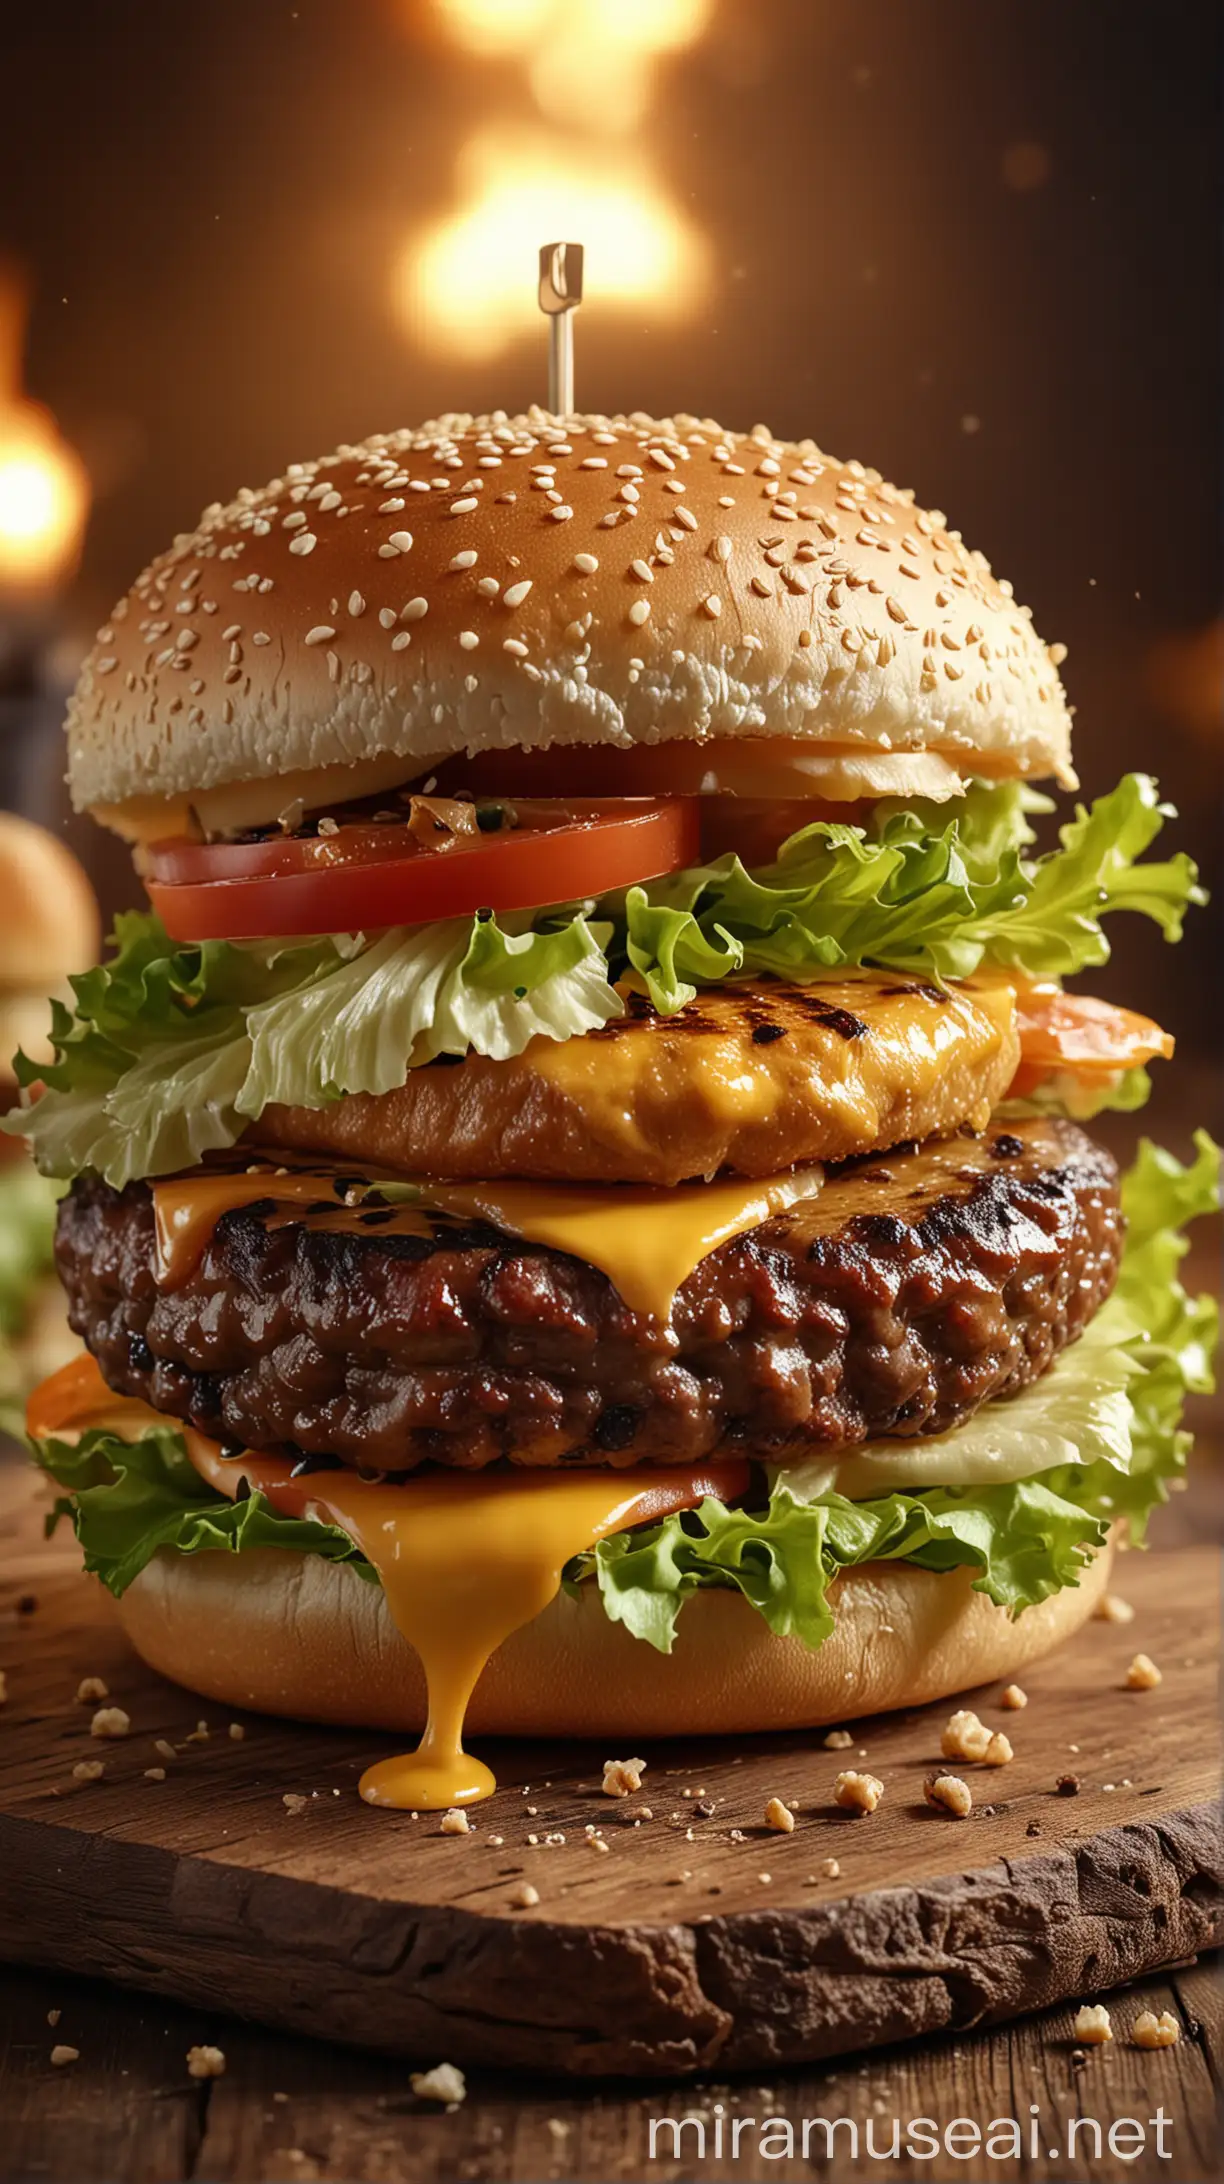 a close up of a hamburger with cheese and lettuce on a wooden table, a close up of a classic burger with cheese and lettuce on a wooden table, luscious patty with sesame seeds, fire spark, orange light, super realistic food picture, high quality food photography, food commercial 4k patty